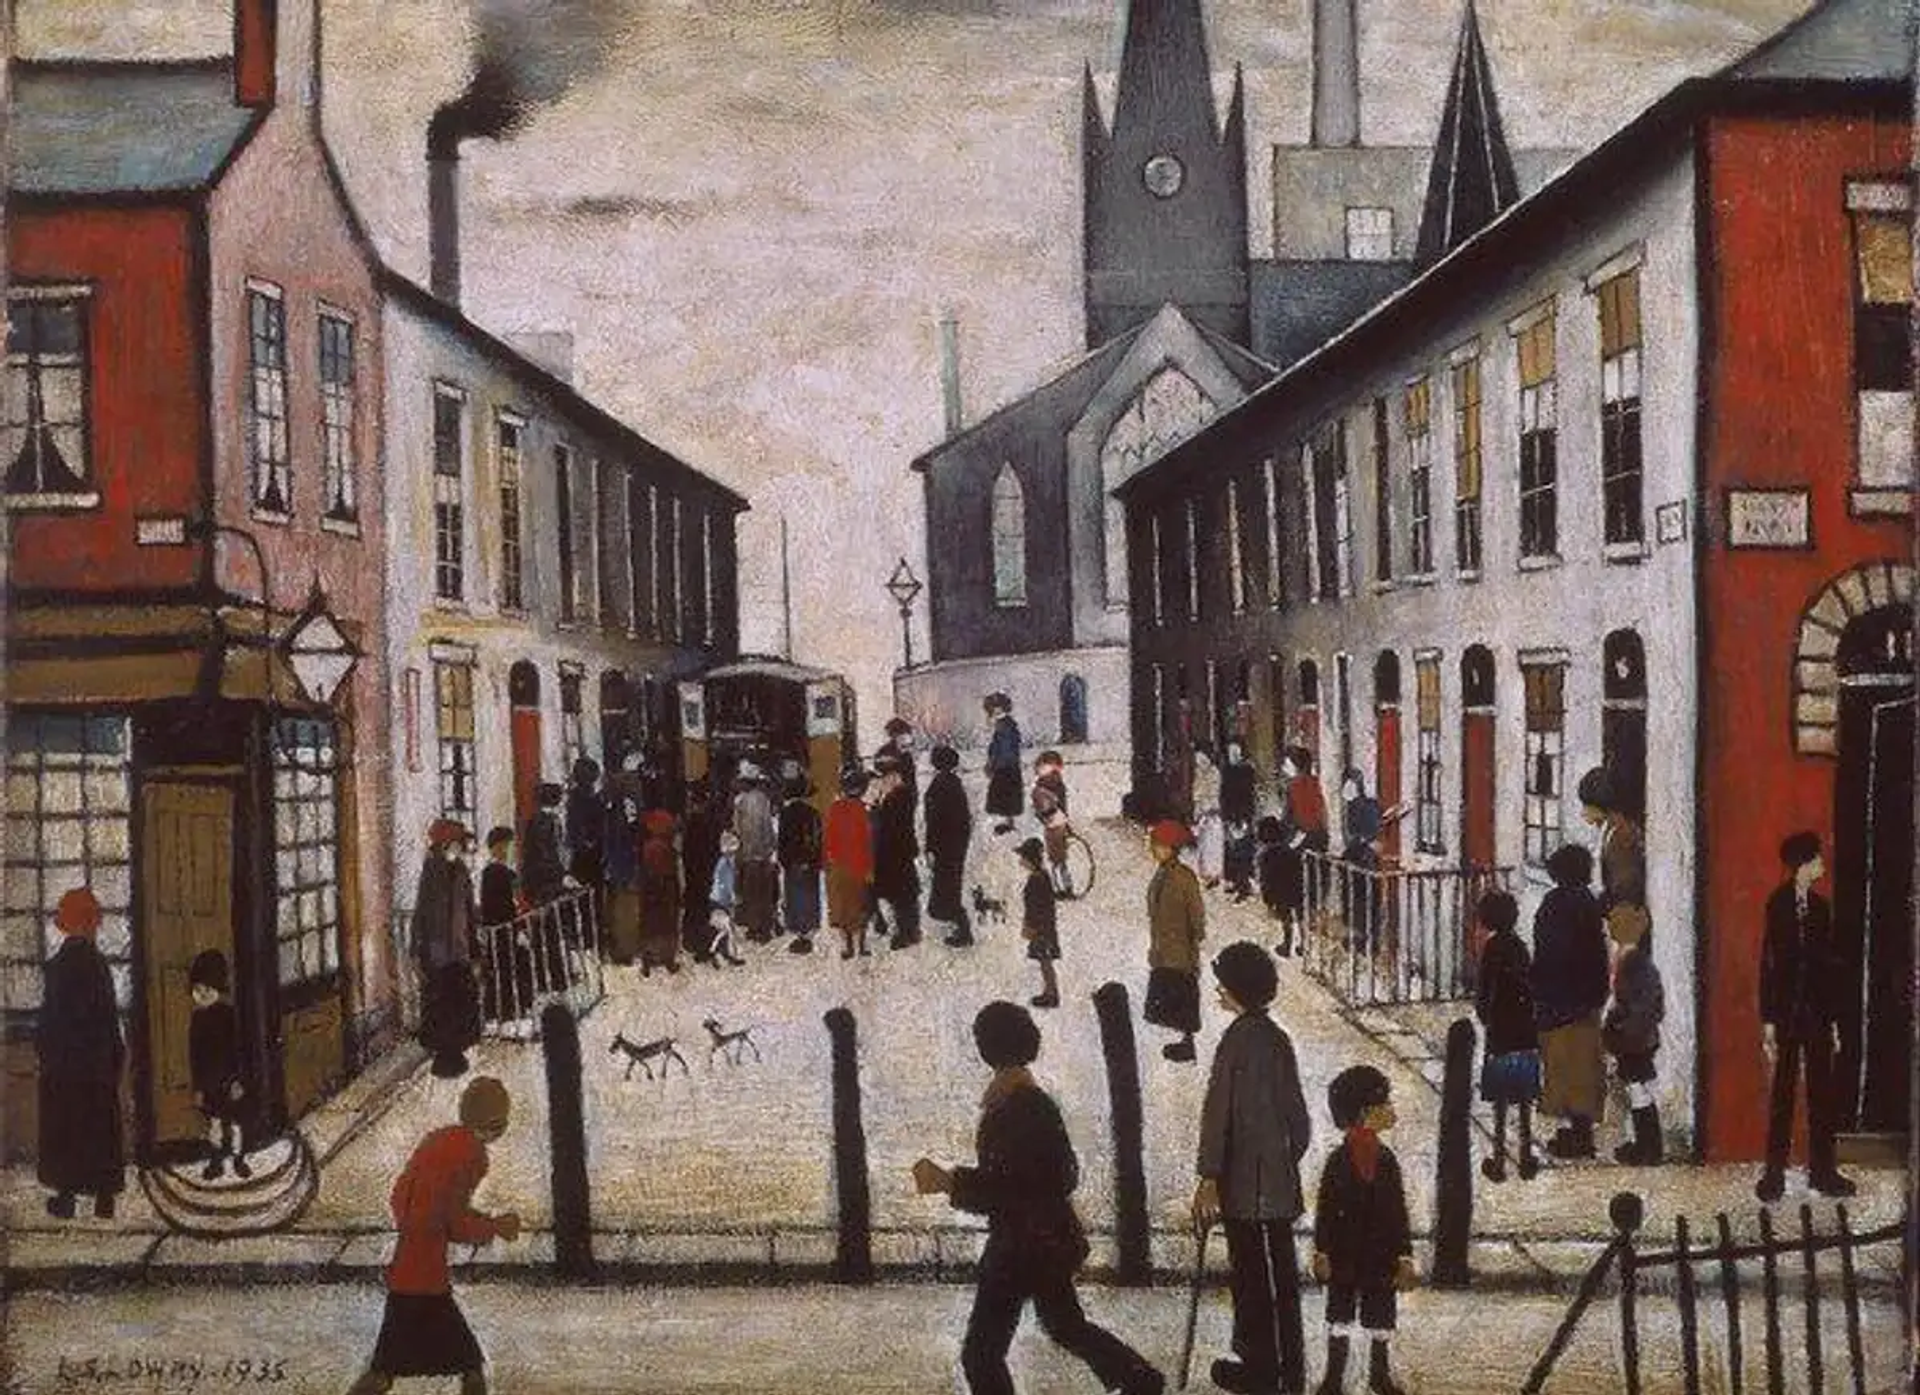 An image by L.S. Lowry of an urban scene, with a church and a factory looming in the background. In the distance, there is an ambulance with a large group of people around it. Throughout the scene, people turn their heads to look at the ambulance.